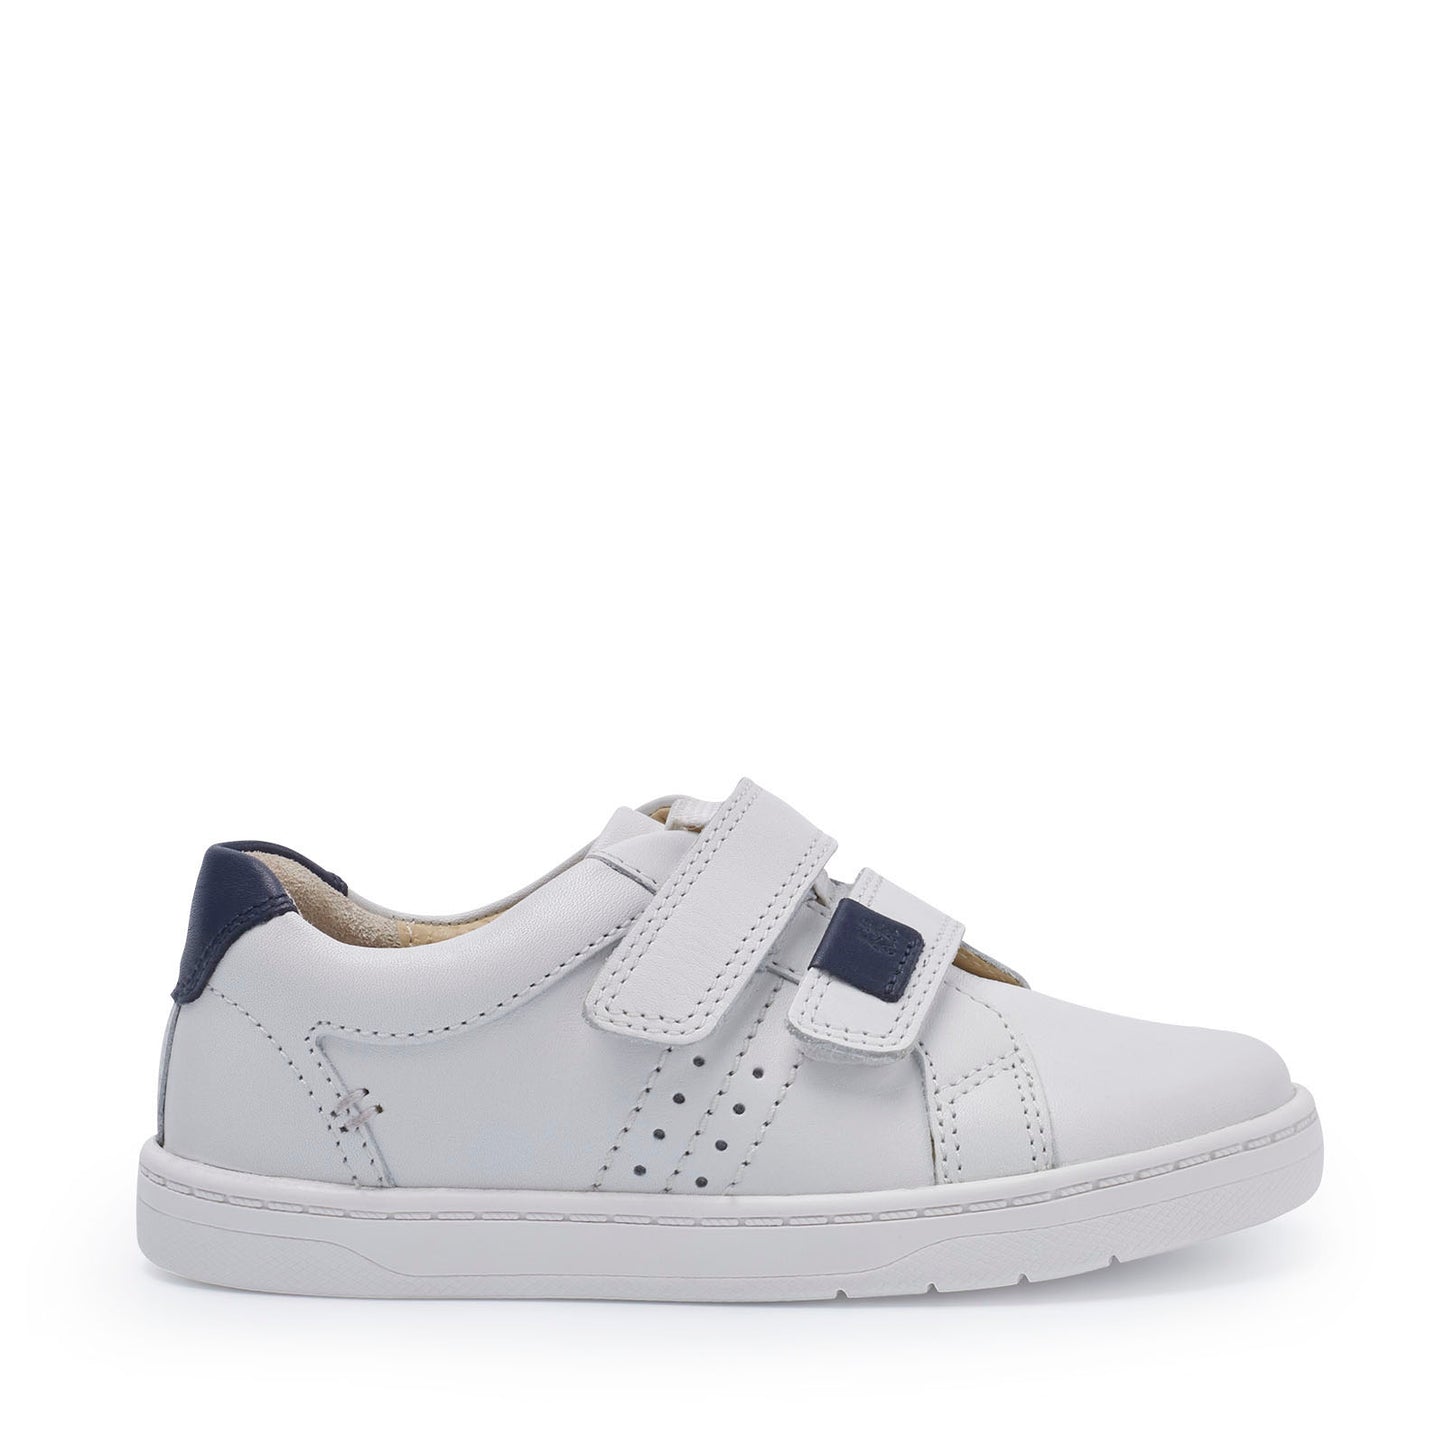 A boys casual shoe by Start Rite, style Explore, in white and navy leather with double velcro fastening. Right side view.